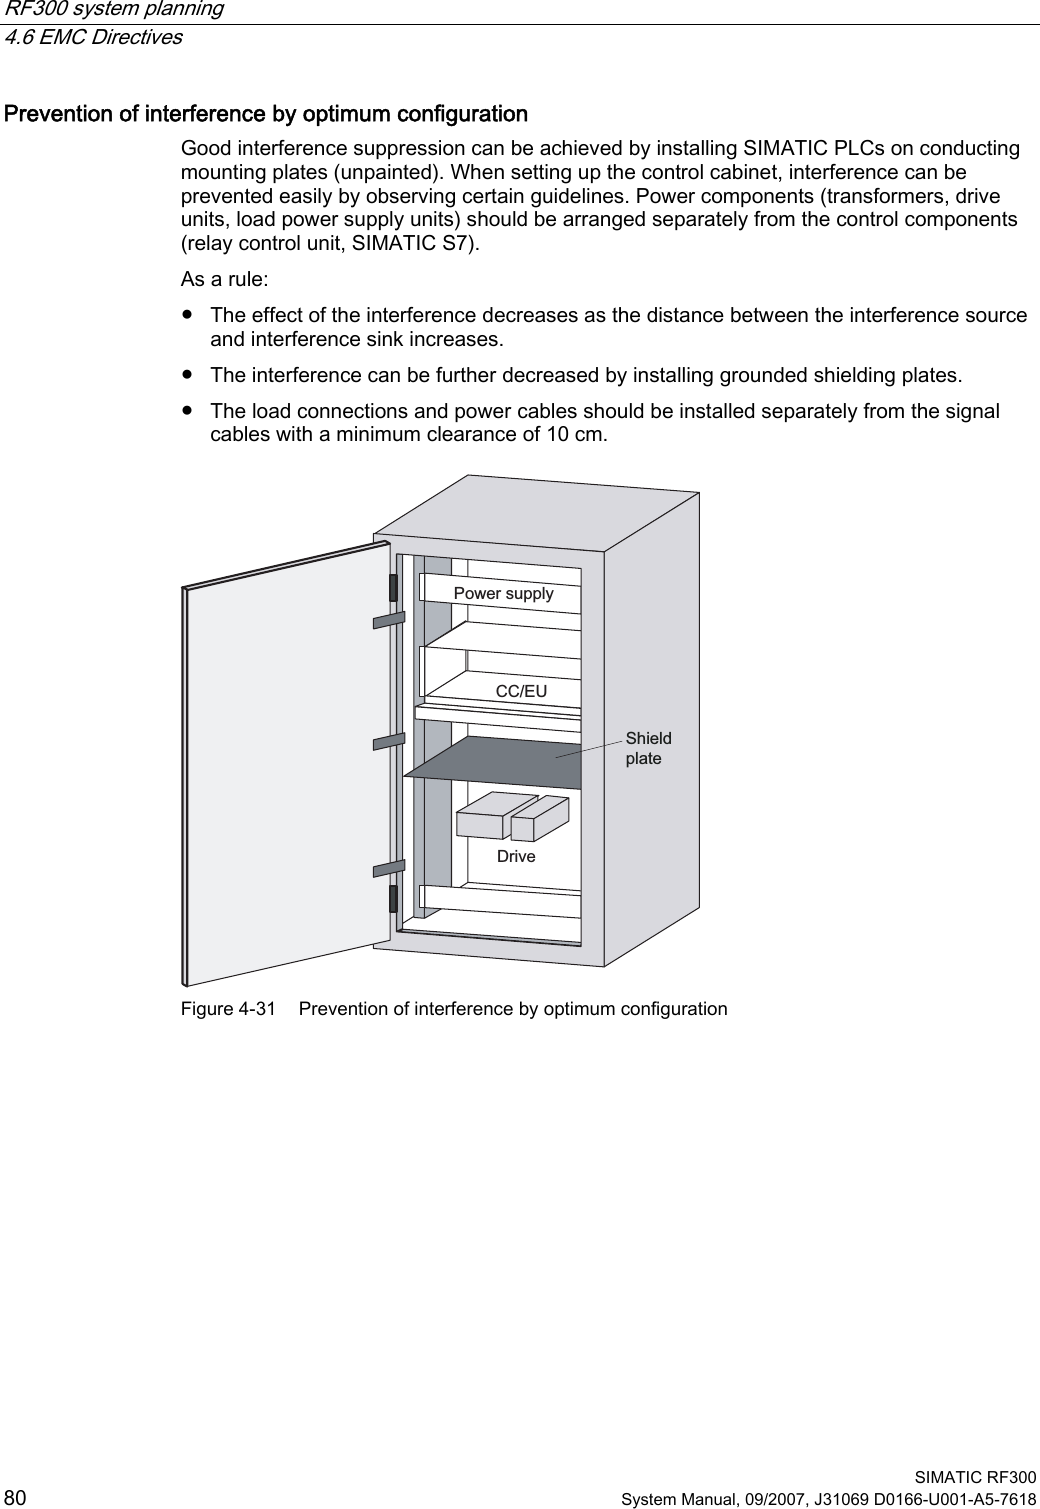 RF300 system planning   4.6 EMC Directives  SIMATIC RF300 80 System Manual, 09/2007, J31069 D0166-U001-A5-7618 Prevention of interference by optimum configuration Good interference suppression can be achieved by installing SIMATIC PLCs on conducting mounting plates (unpainted). When setting up the control cabinet, interference can be prevented easily by observing certain guidelines. Power components (transformers, drive units, load power supply units) should be arranged separately from the control components (relay control unit, SIMATIC S7). As a rule: ●  The effect of the interference decreases as the distance between the interference source and interference sink increases. ●  The interference can be further decreased by installing grounded shielding plates. ●  The load connections and power cables should be installed separately from the signal cables with a minimum clearance of 10 cm. 3RZHUVXSSO\&amp;&amp;(8&apos;ULYH6KLHOGSODWH Figure 4-31  Prevention of interference by optimum configuration 